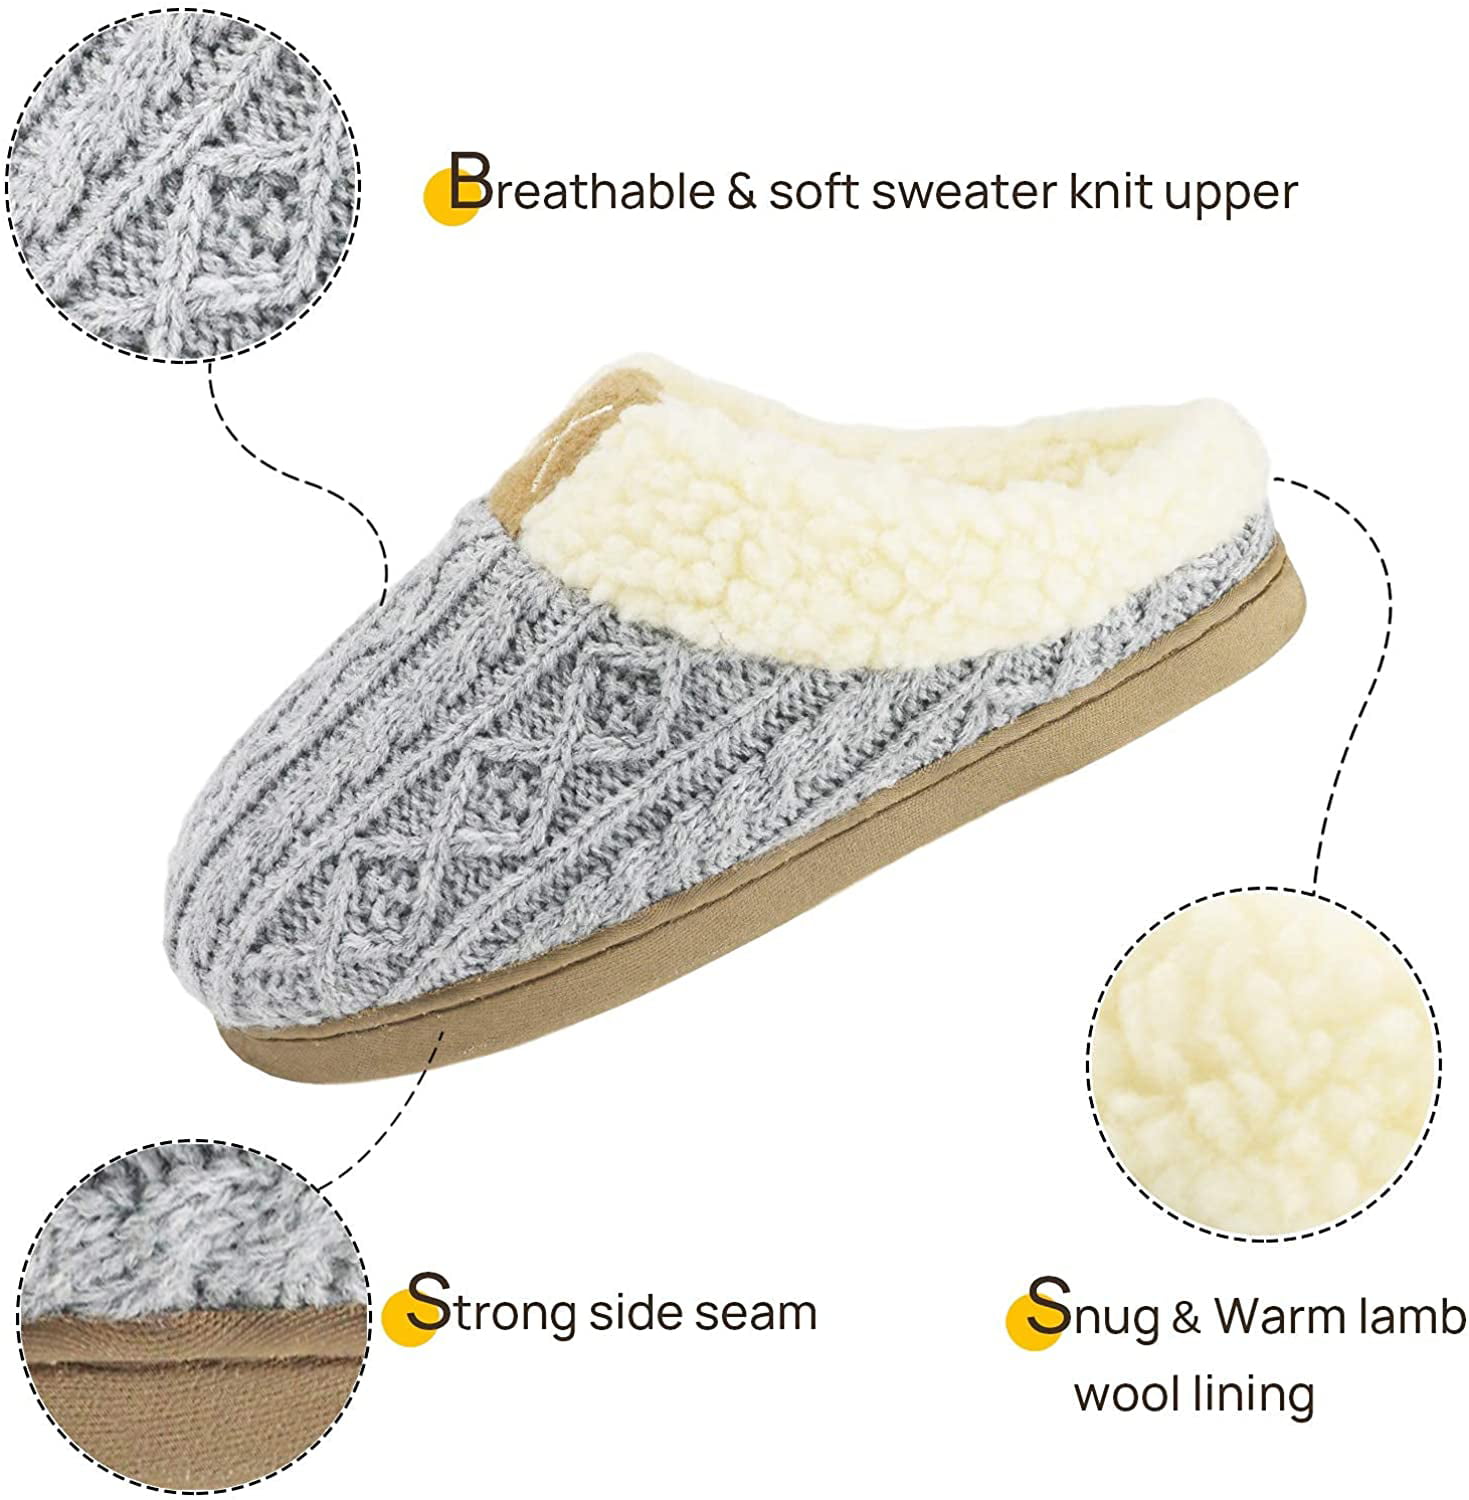 Classic Memory Foam Fleece Lining Slip-on Knit Slippers Gumusservi Unisex House Slippers for Women Men Non Slip Sole Indoor Outdoor Warm Cozy Breathable Winter Home Shoes 